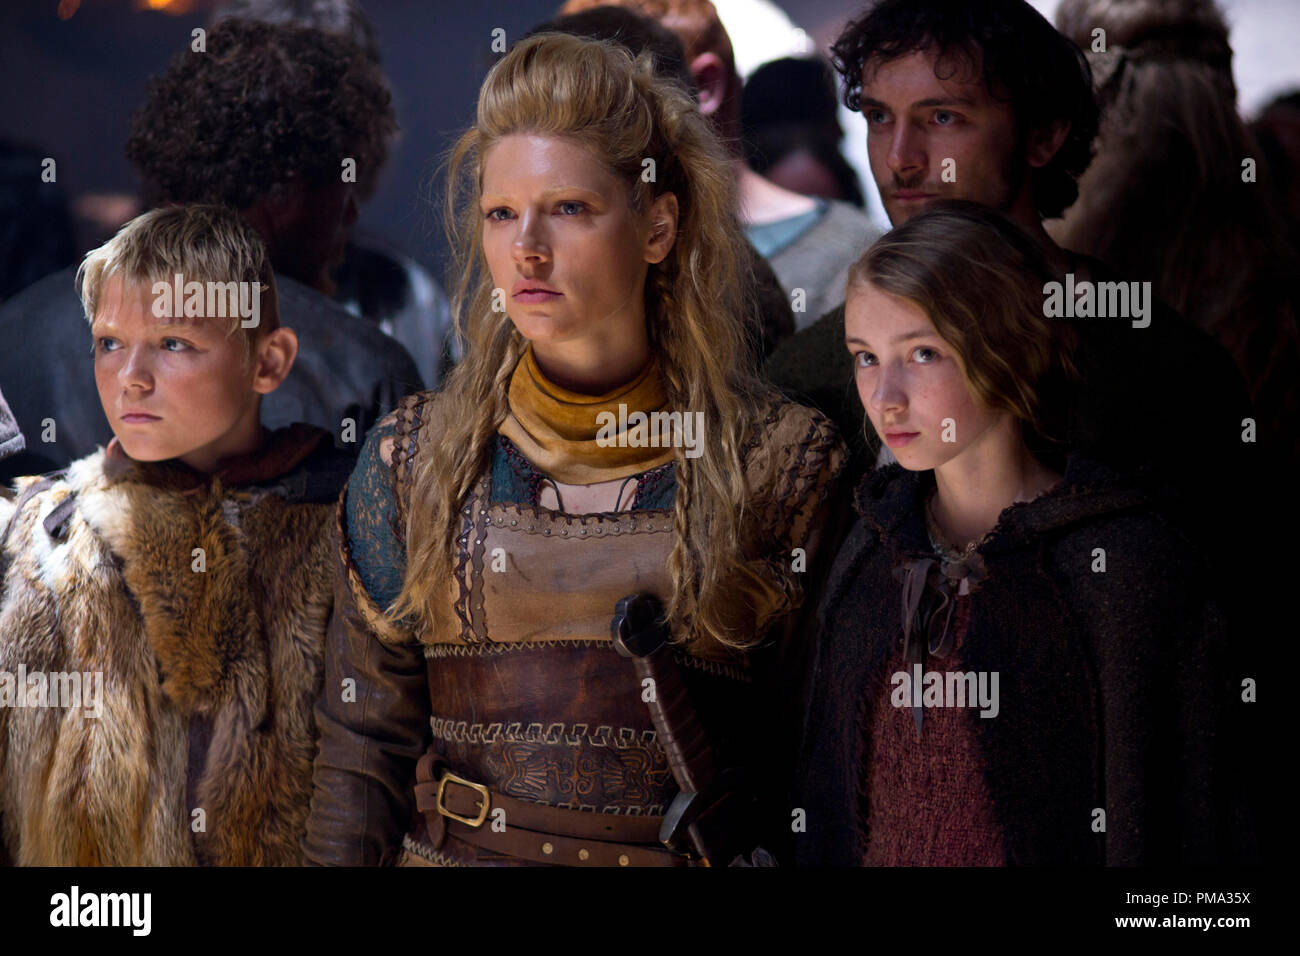 Vikings 2013 Ragnar Lothbrok S Wife And Children Left To Right Bjorn Nathan O Toole Lagertha Katheryn Winnick And Gyda Ruby O Leary Stock Photo Alamy Gyda, i have come to say goodbye to you properly. https www alamy com vikings 2013 ragnar lothbroks wife and children left to right bjorn nathan otoole lagertha katheryn winnick and gyda ruby oleary image219039574 html